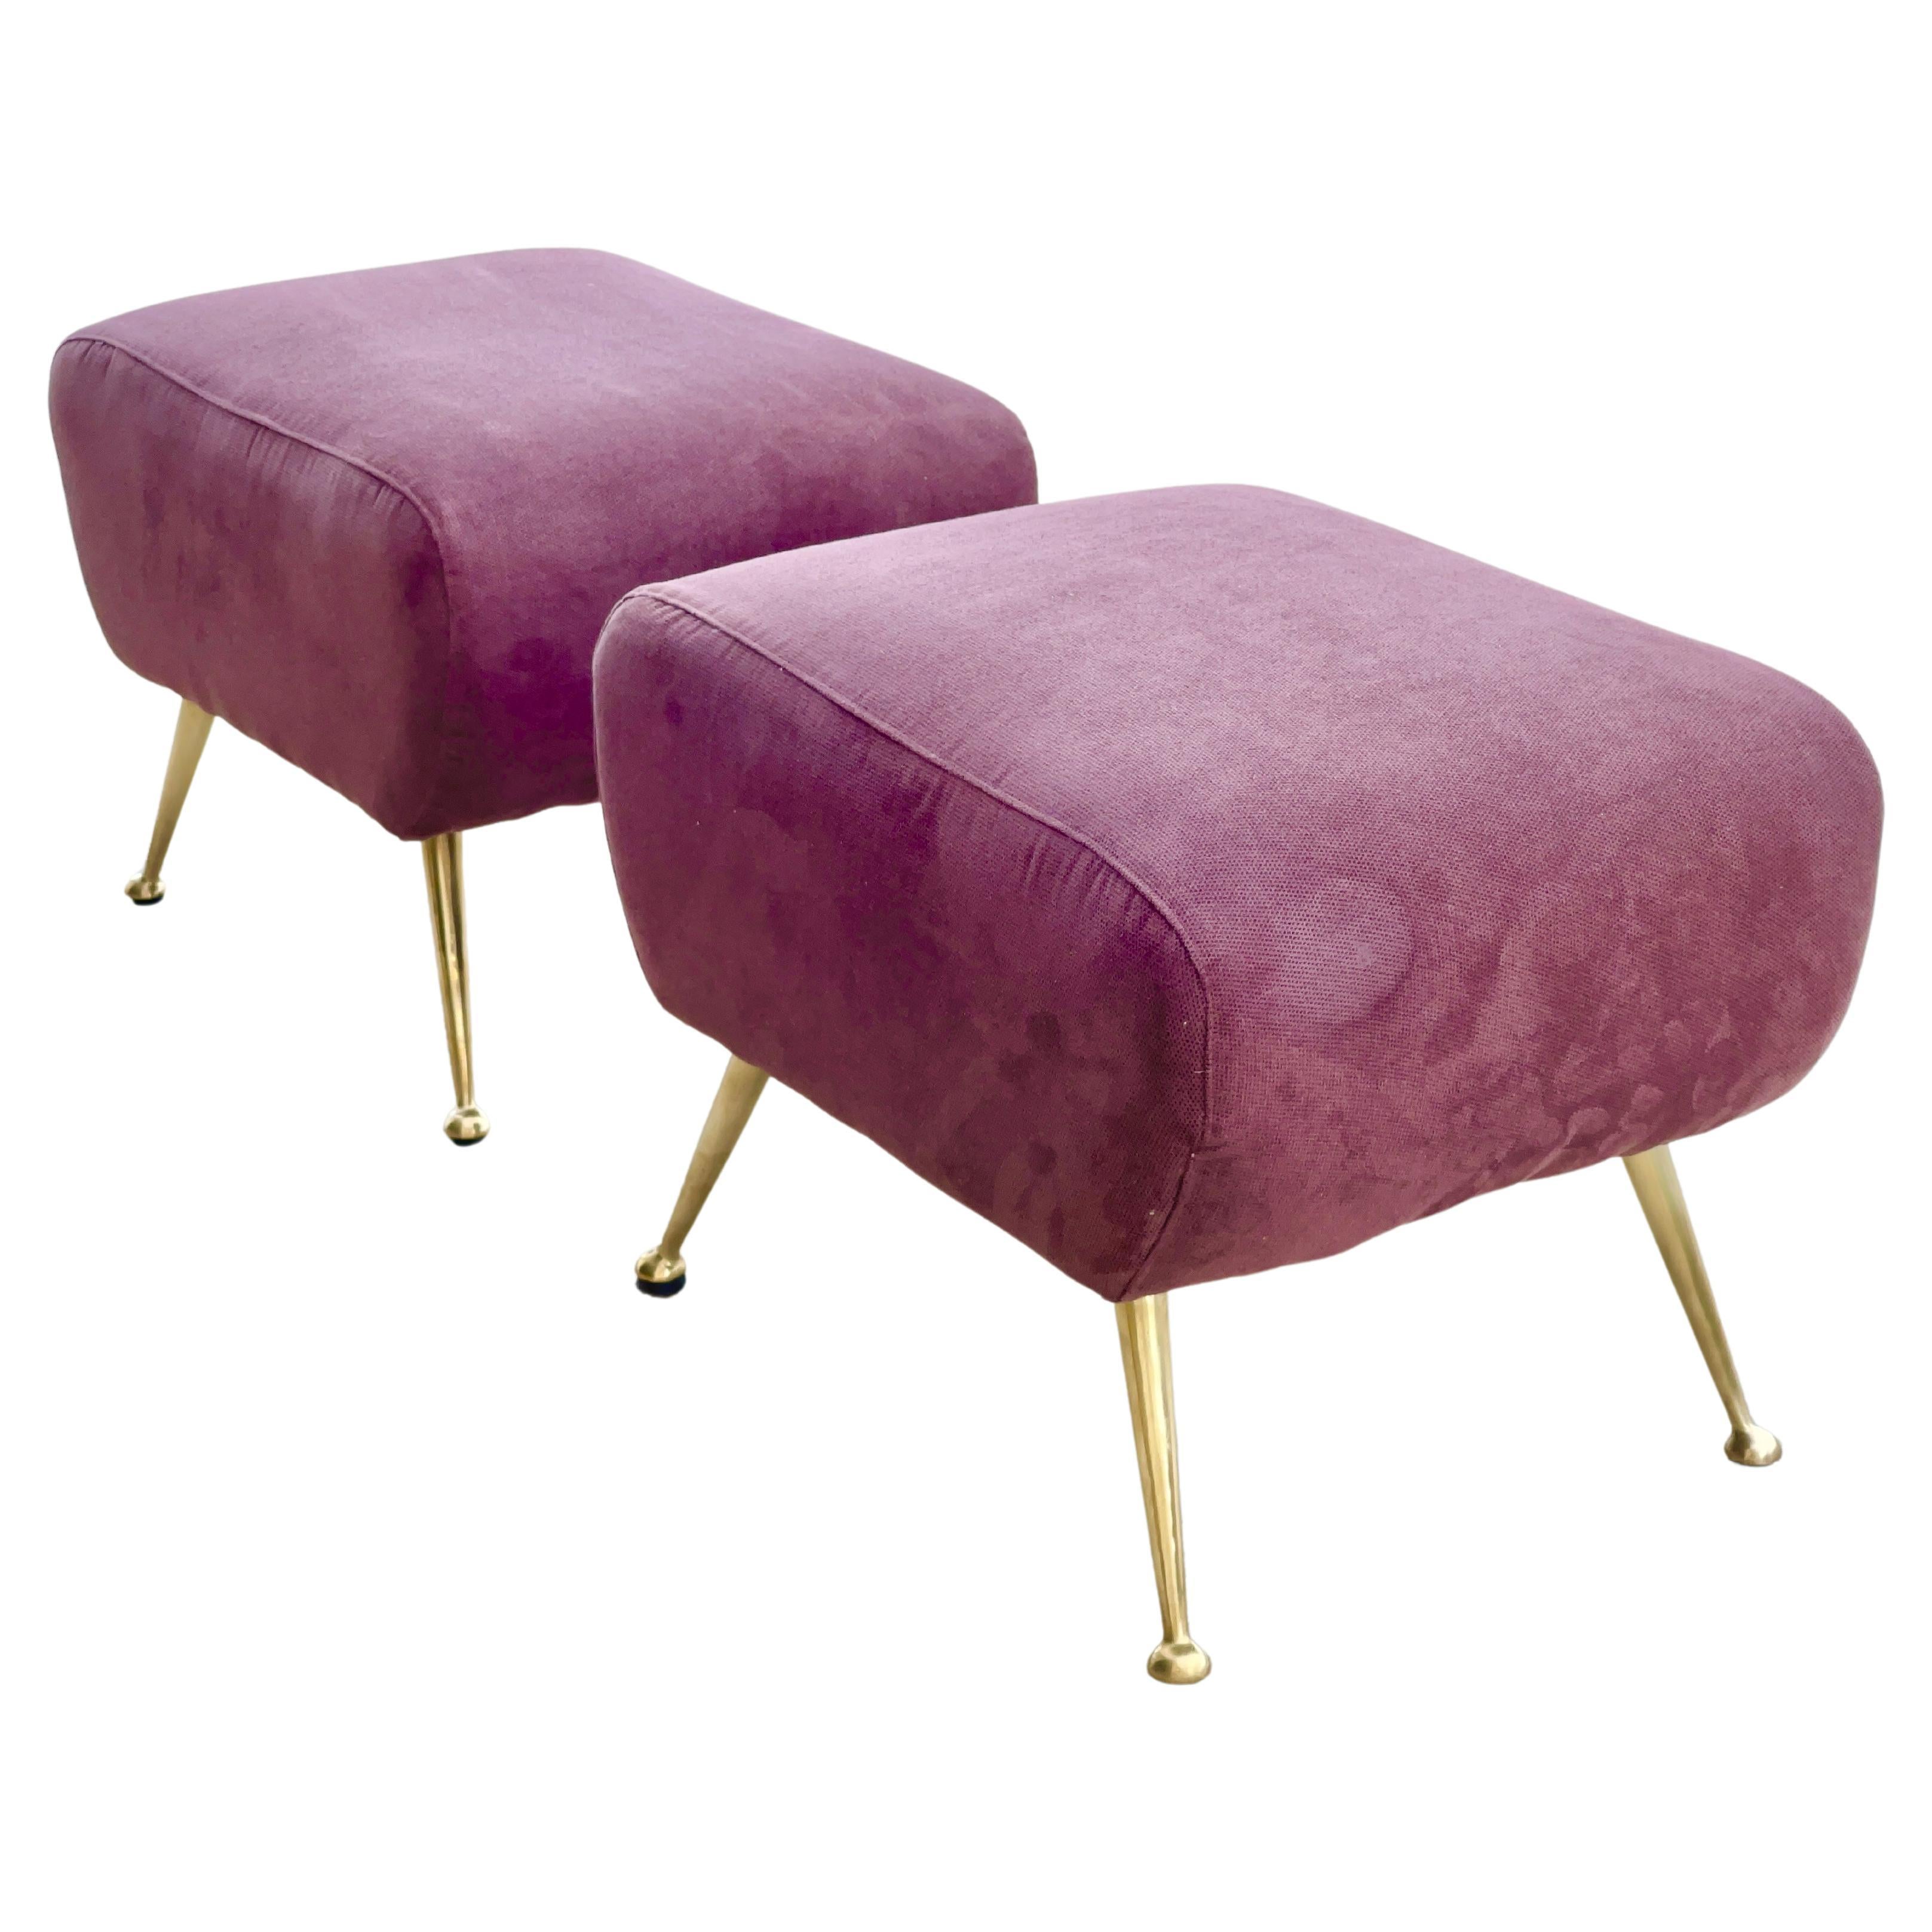 1950's Italian Foot Stools with Solid Brass Tapered Legs